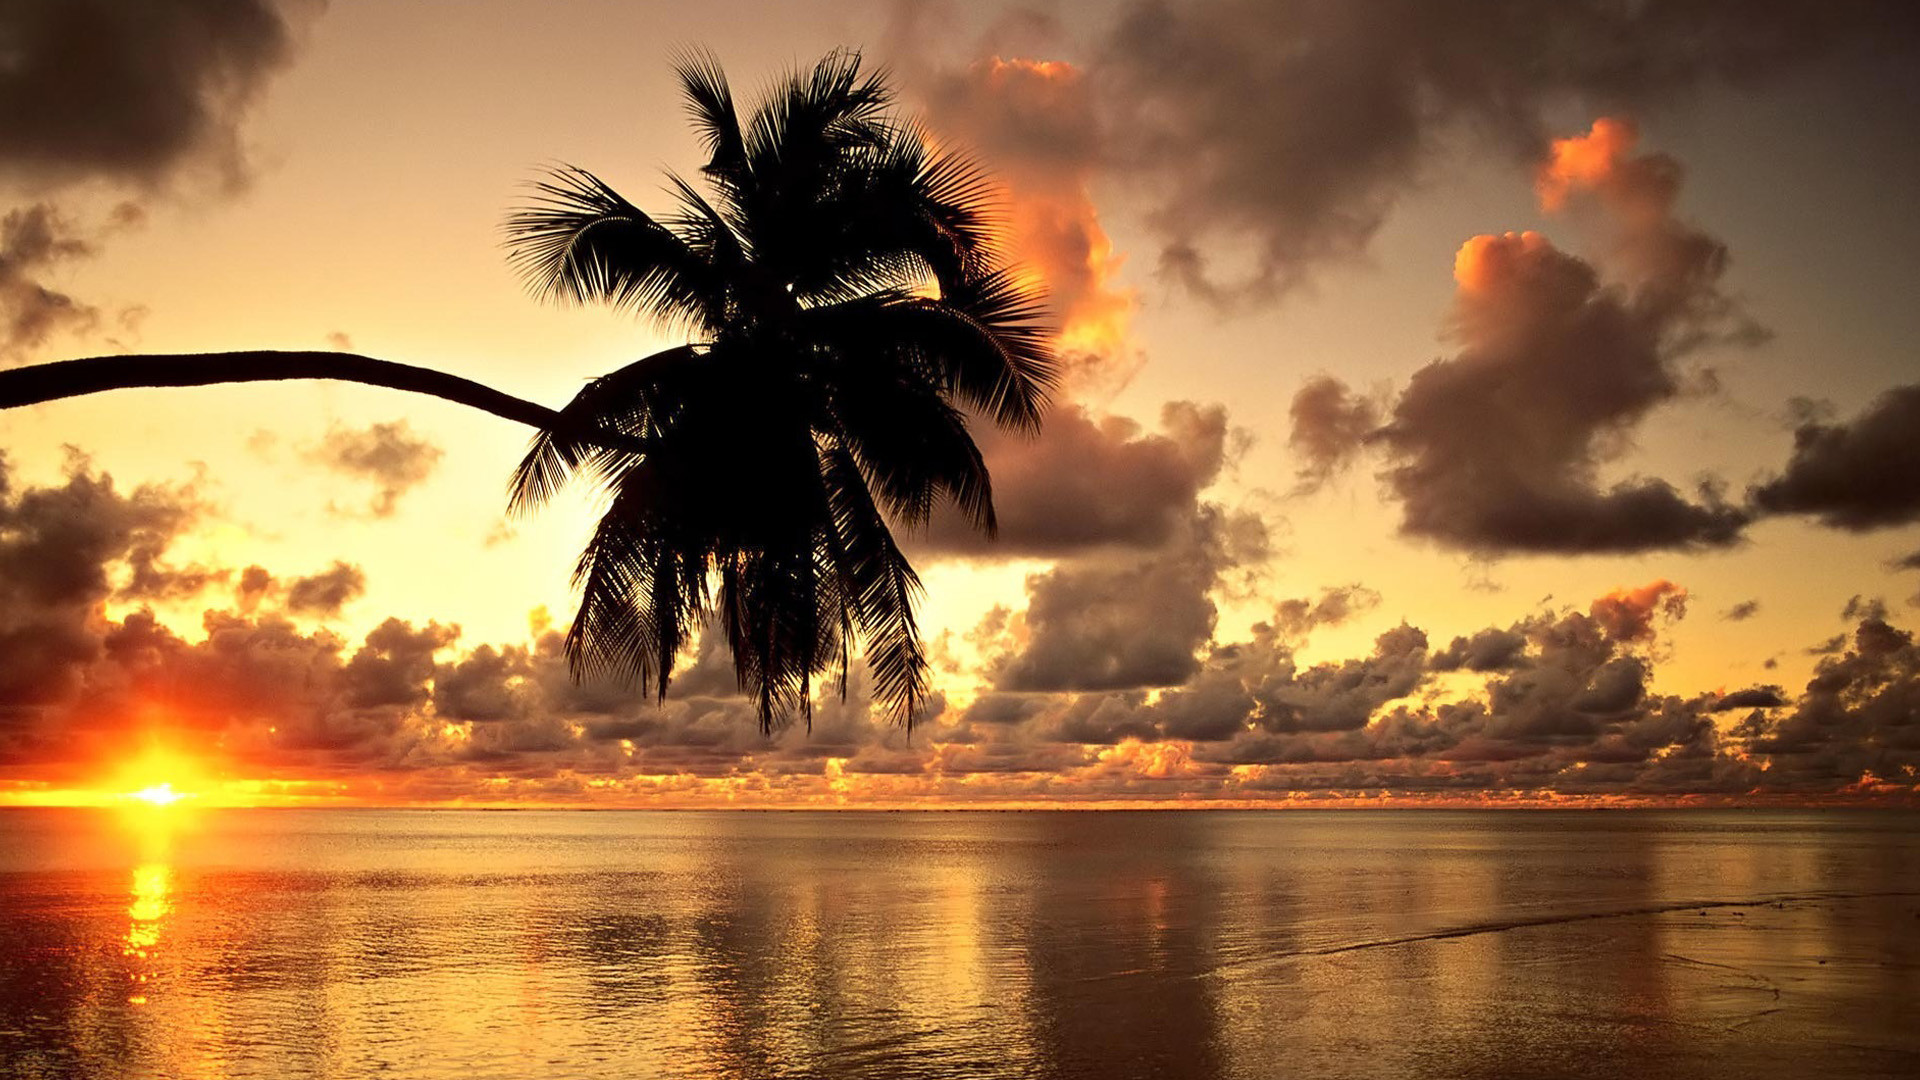 1920x1080 Tropical sunset beach beautiful scenery Wallpapers, Beach Pictures .